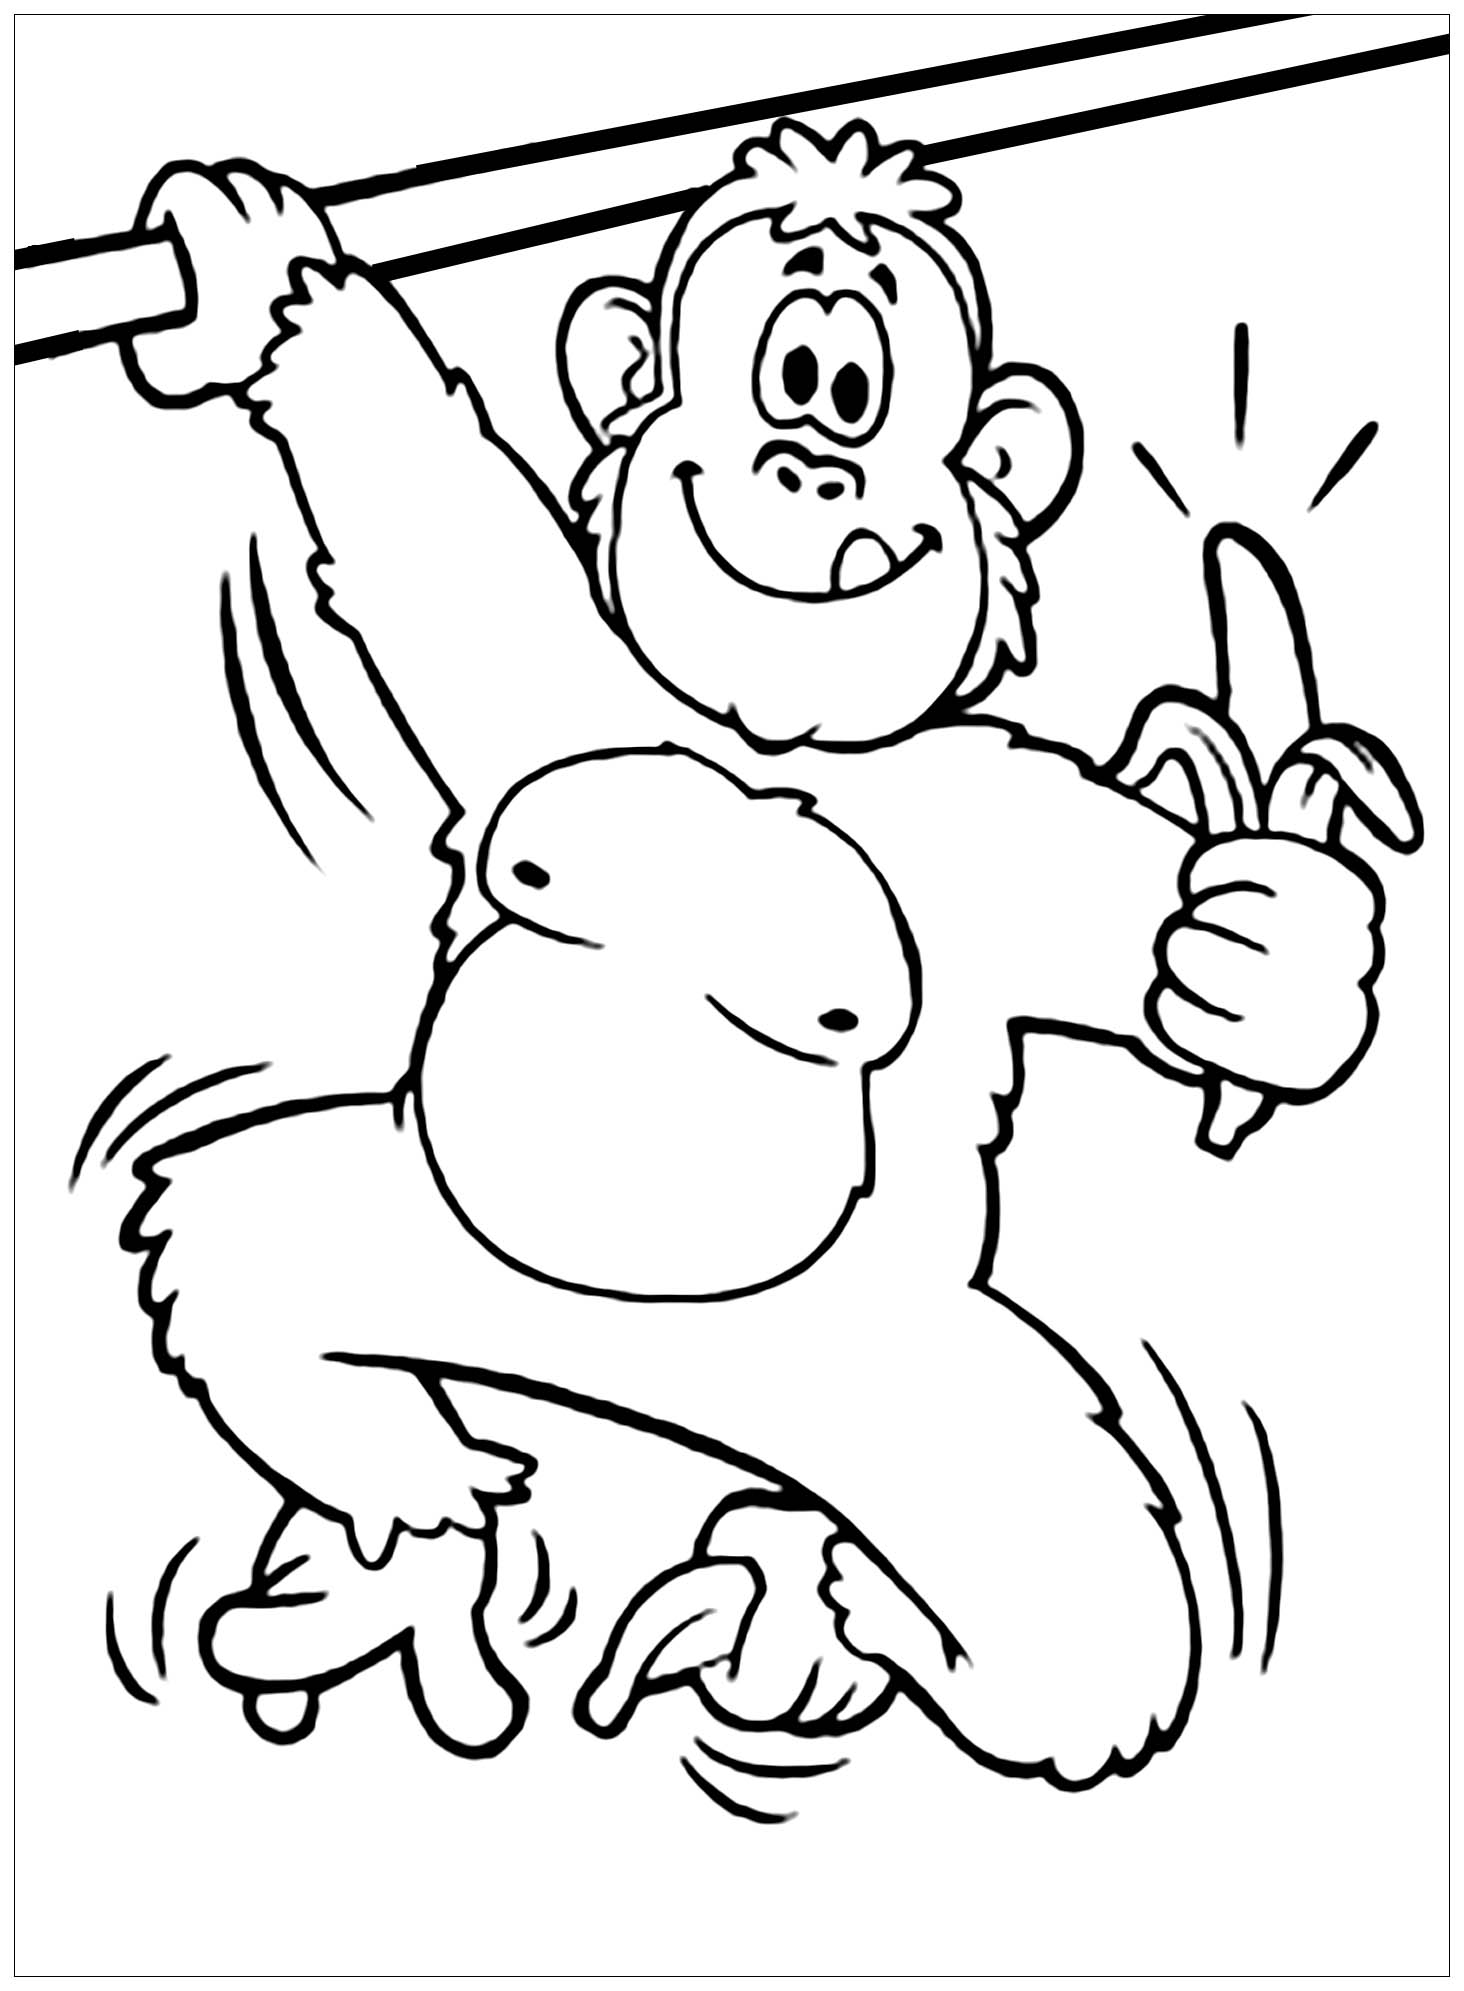 monkey-coloring-pages-to-download-monkeys-kids-coloring-pages